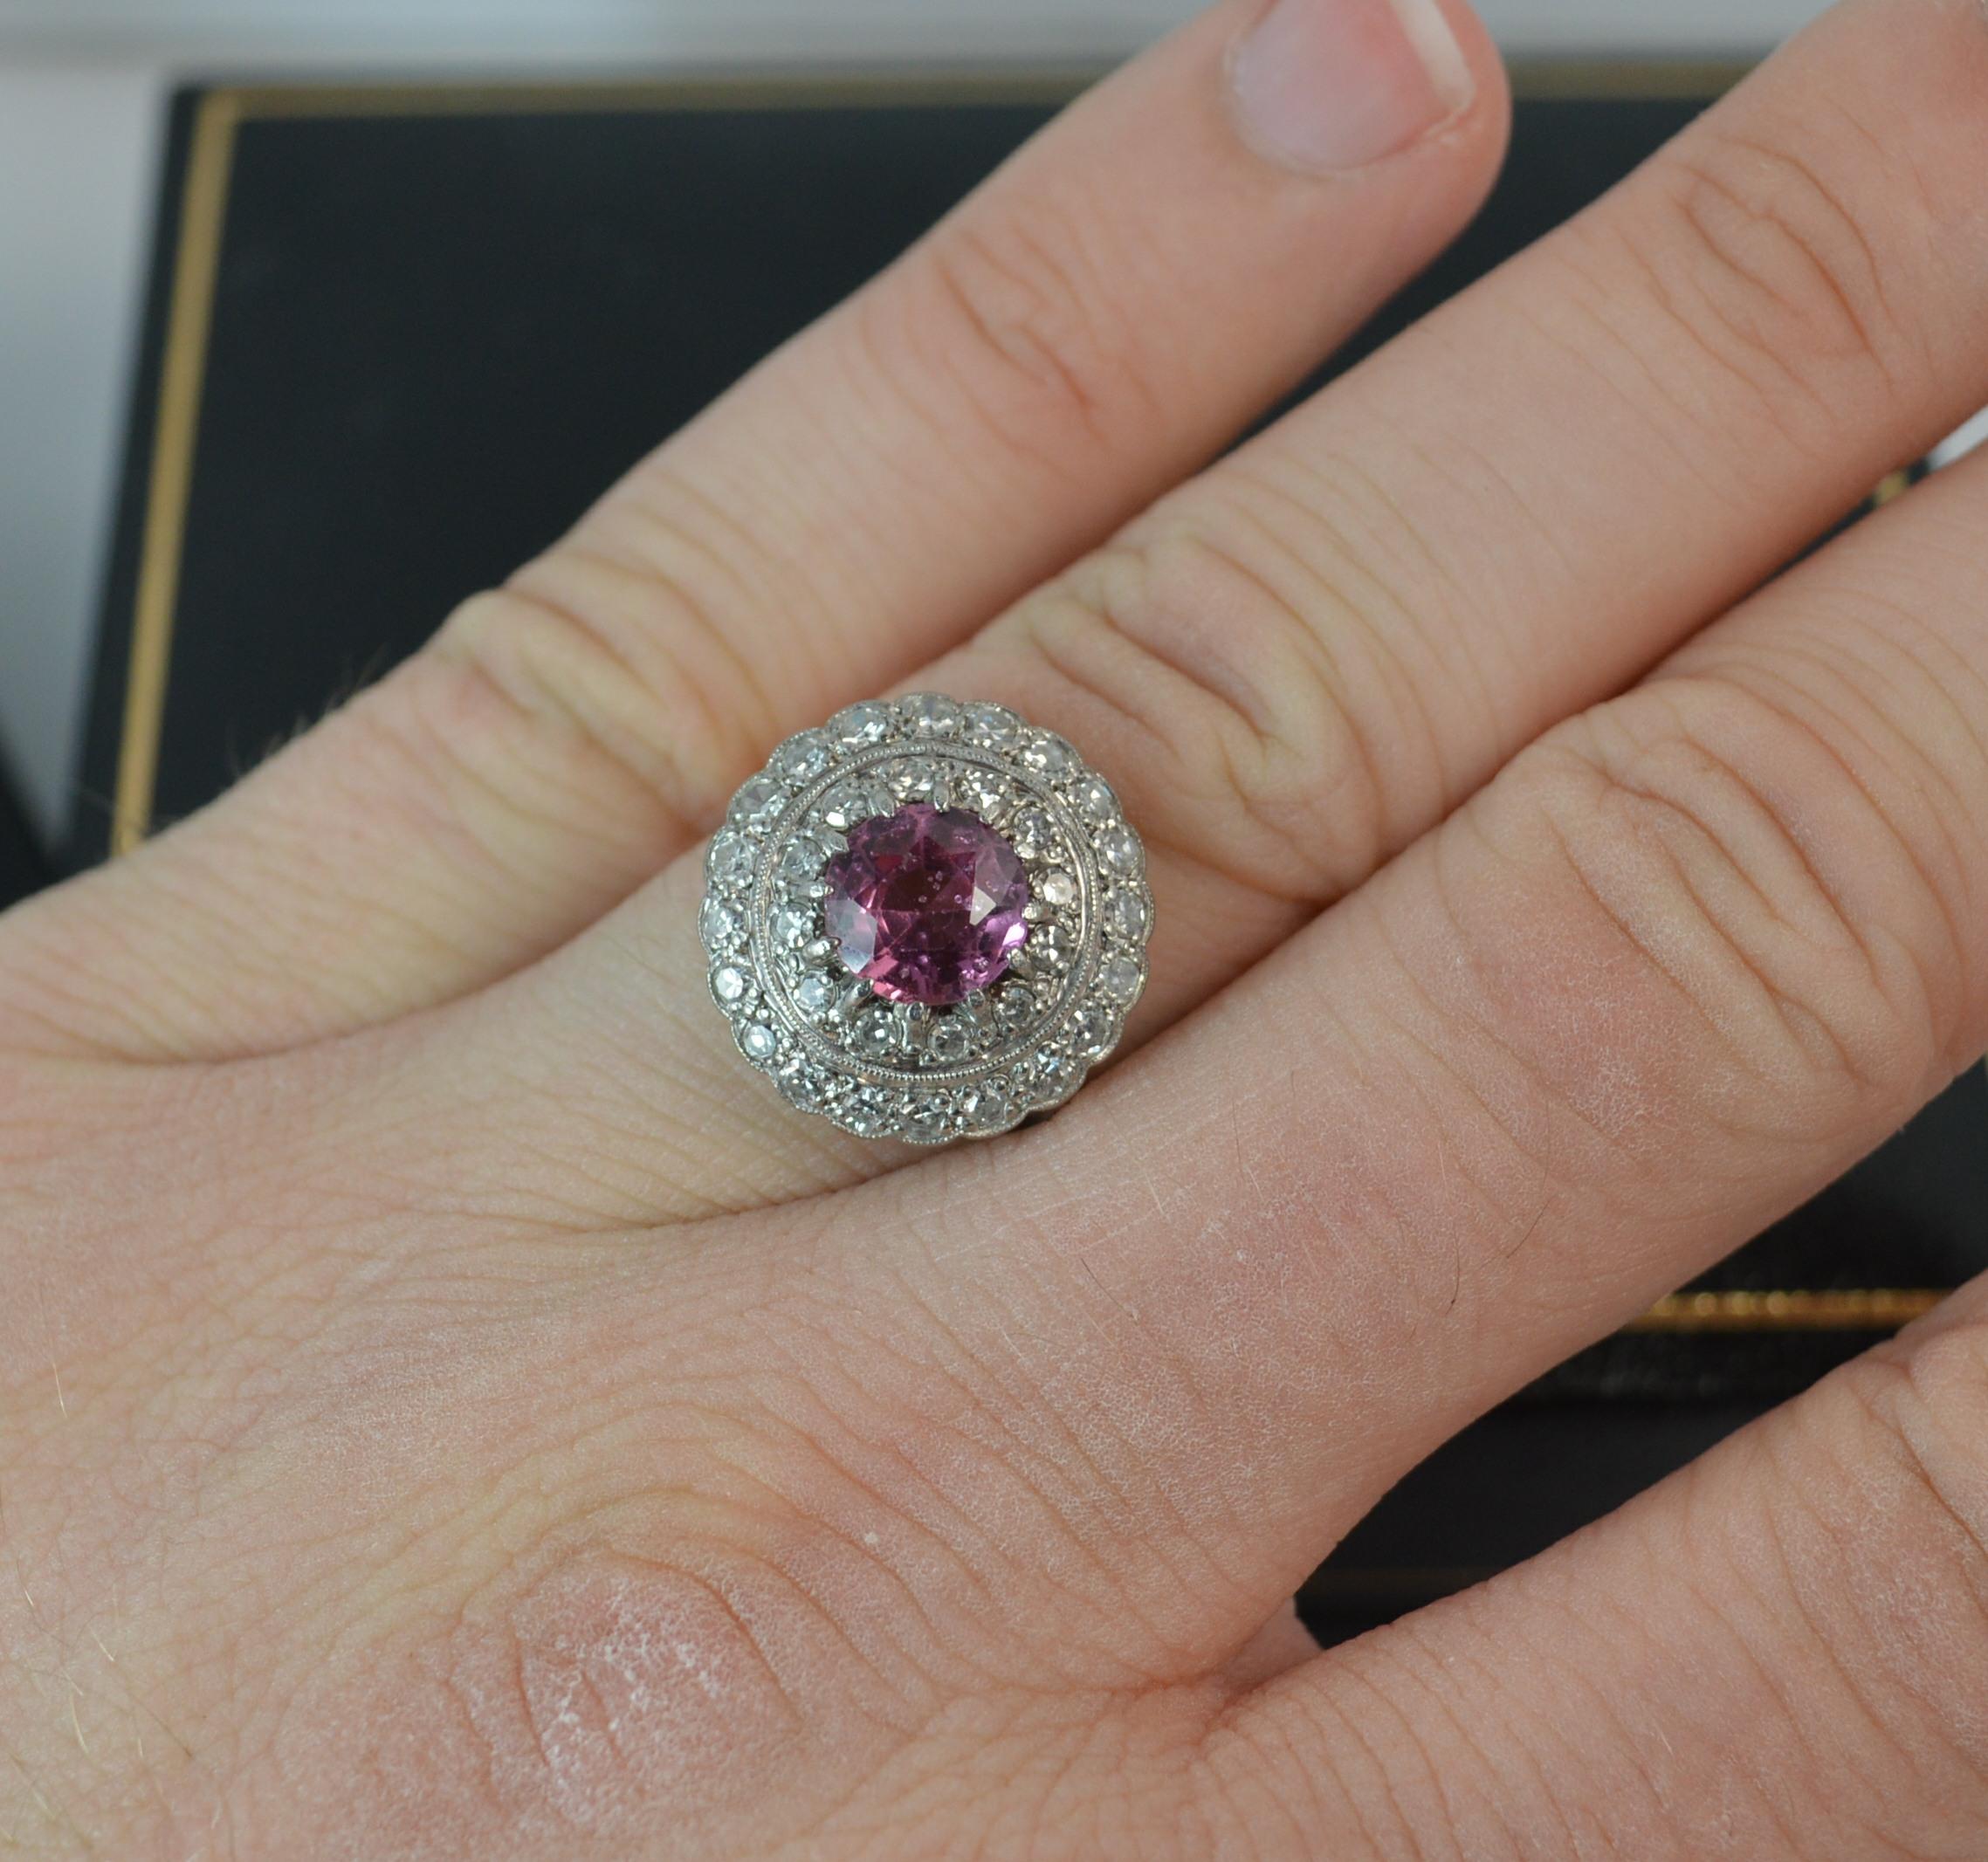 A stunning vintage cluster cocktail ring.
SIZE ; L 1/2 UK, 6 US
Solid 18 carat yellow gold shank with platinum head setting.

Designed with a round cut pink spinel stone to centre, 7mm diameter. Surrounding are two rows of natural round either cut